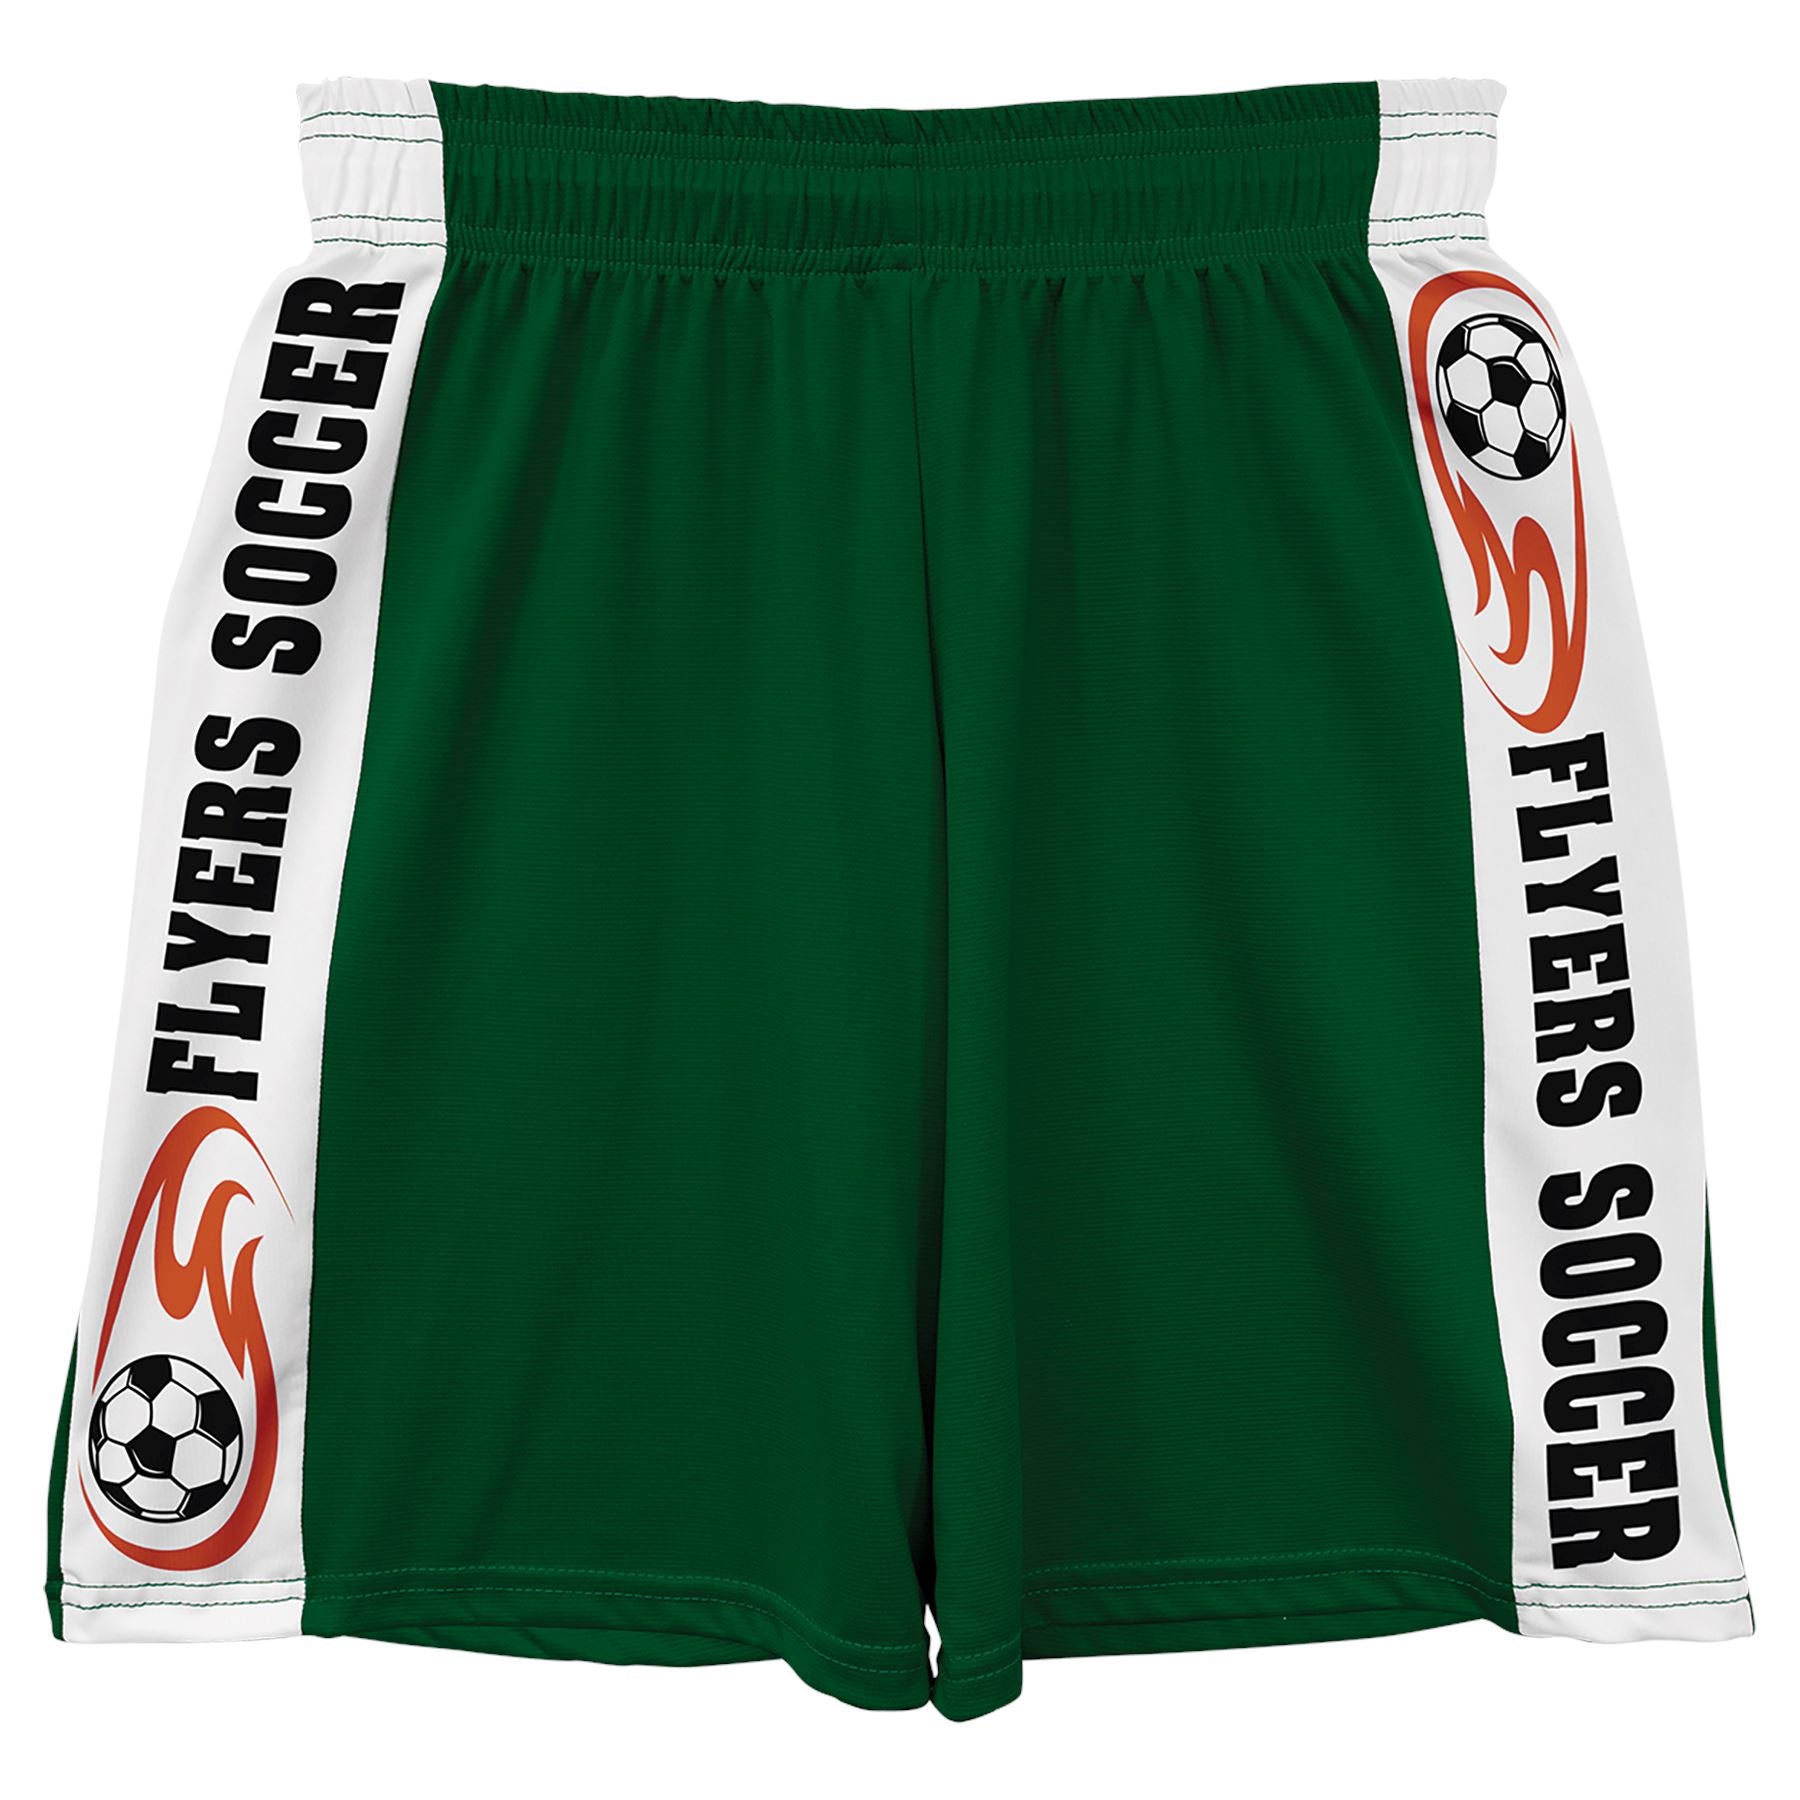 Subli-Tru Shorts, Youth, Full Color Dye Sub Shorts Craftworks NW Forest Green Small 